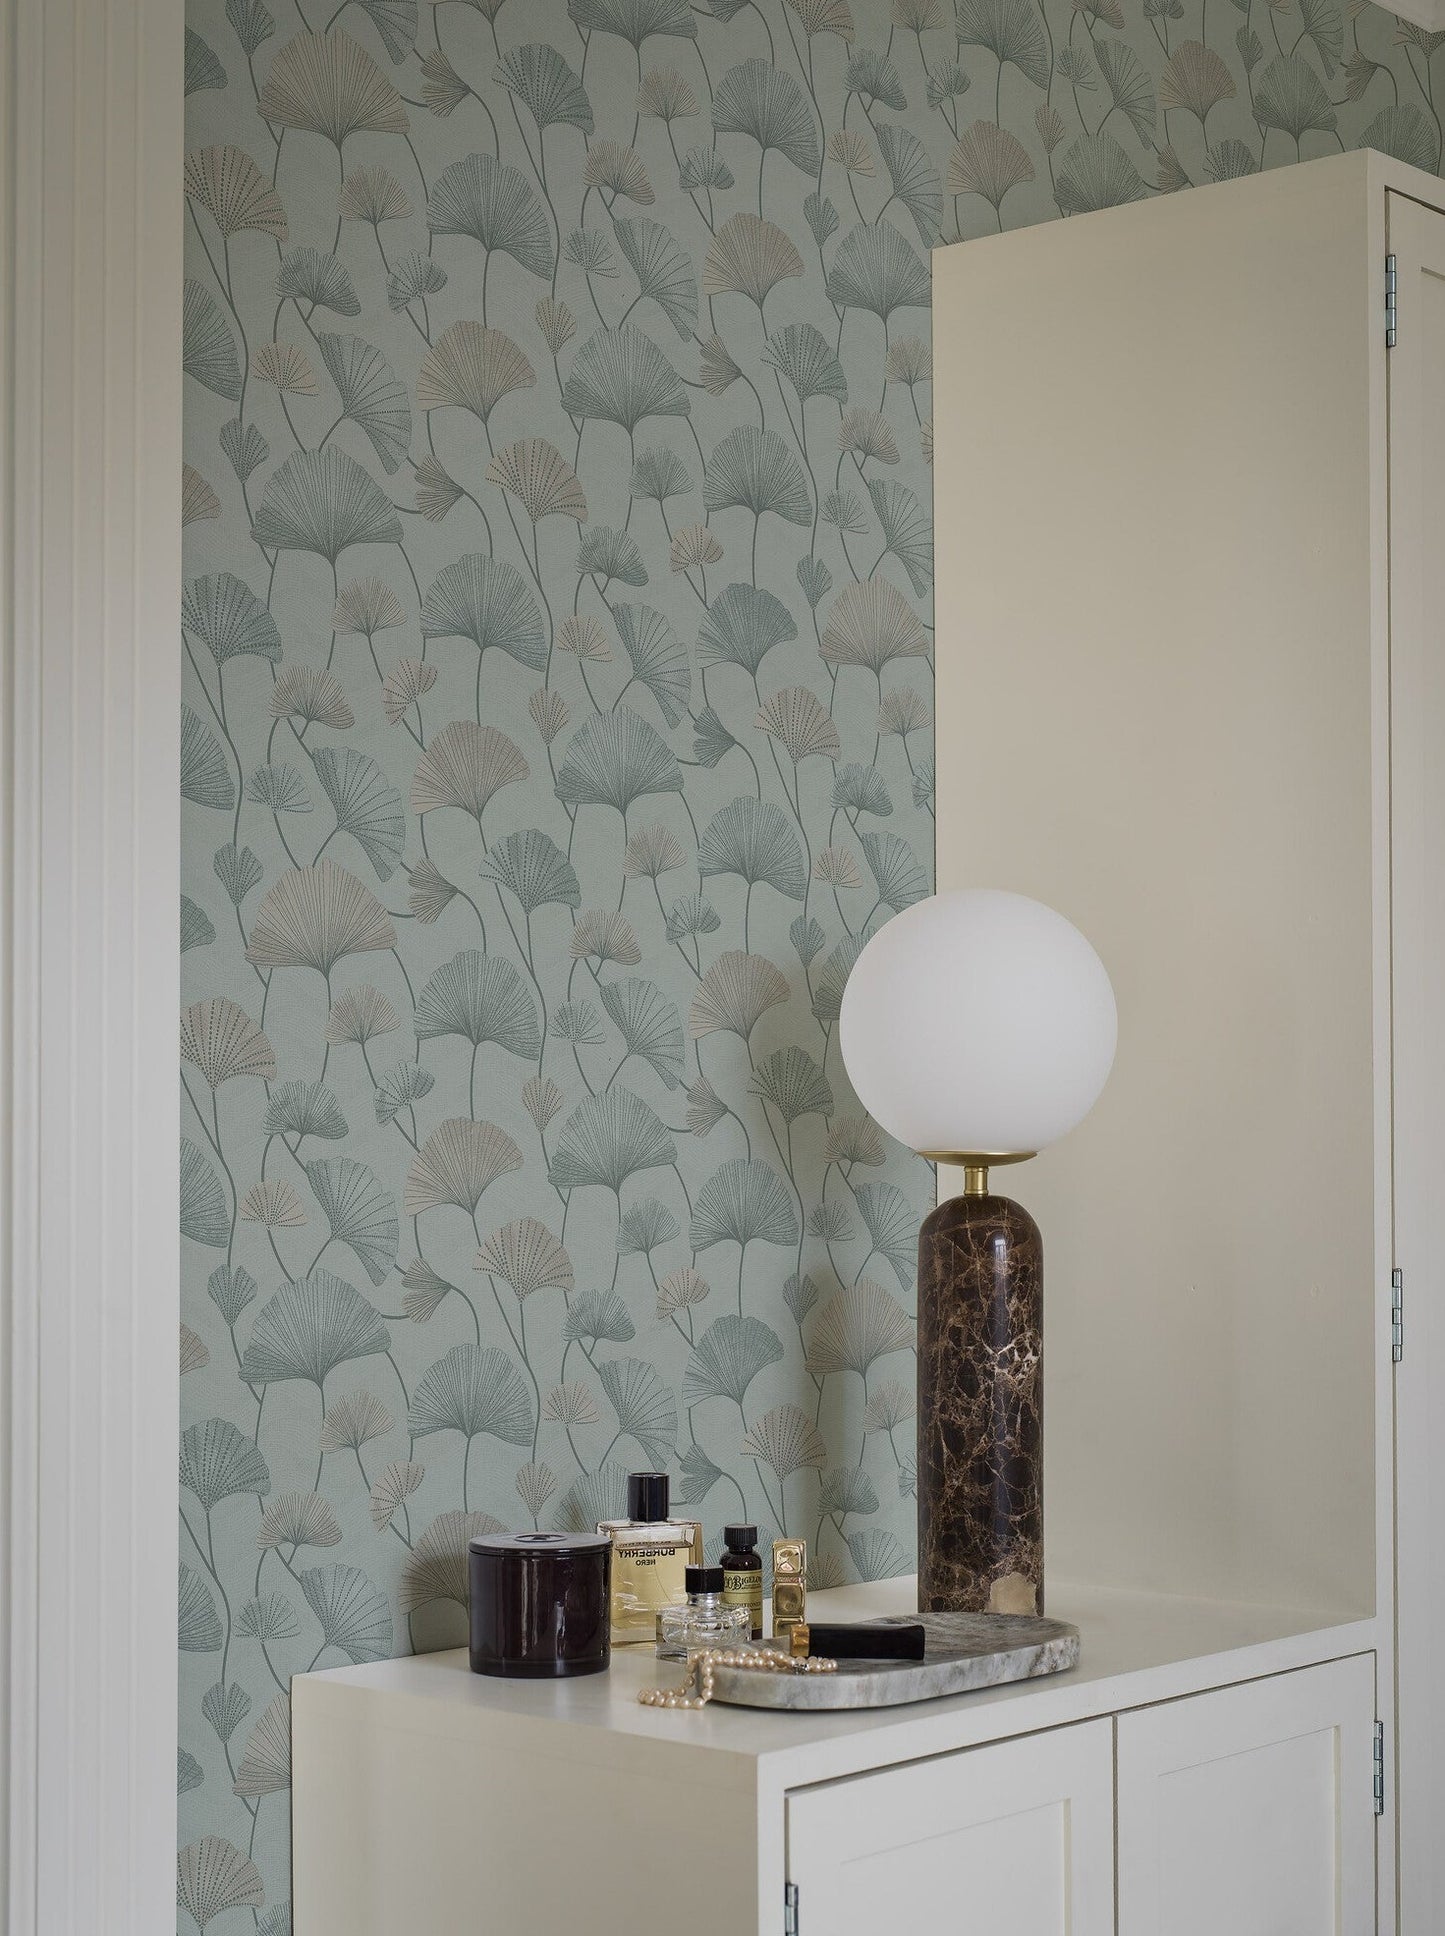 Set on a light blue background with blue, turquoise and shimmering silver, our Sophia wallpaper evokes a sense of tranquillity and serenity.